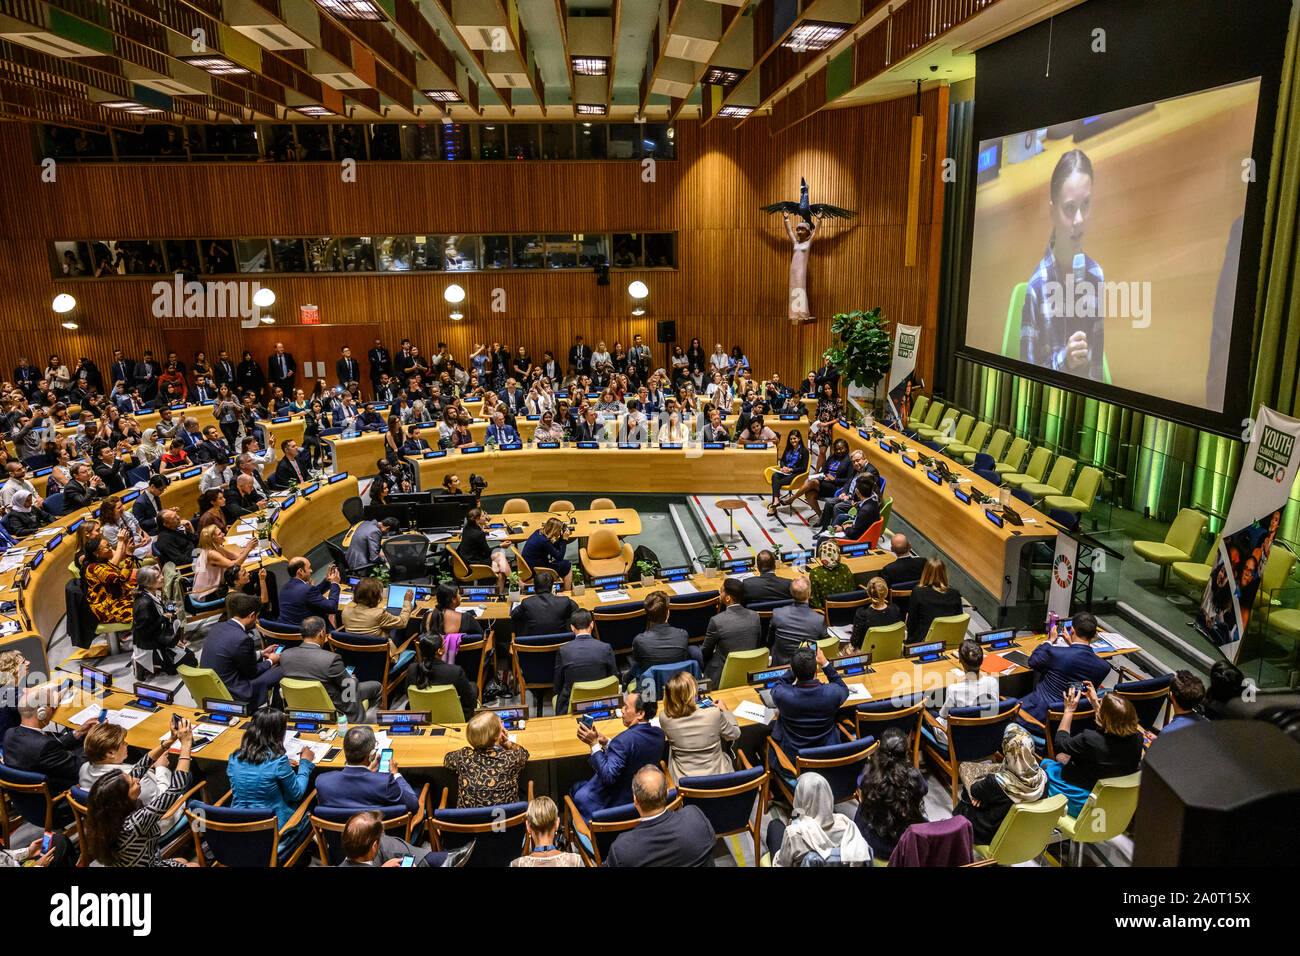 New York, USA,  21 September 2019.  Swedish environmental activists Greta Thunberg delivers the opening speech at the Youth Climate Summit next to UN Secretary-General António Guterres at the United Nations Headquarters in New York City. Credit: Enrique Shore/Alamy Live News Stock Photo